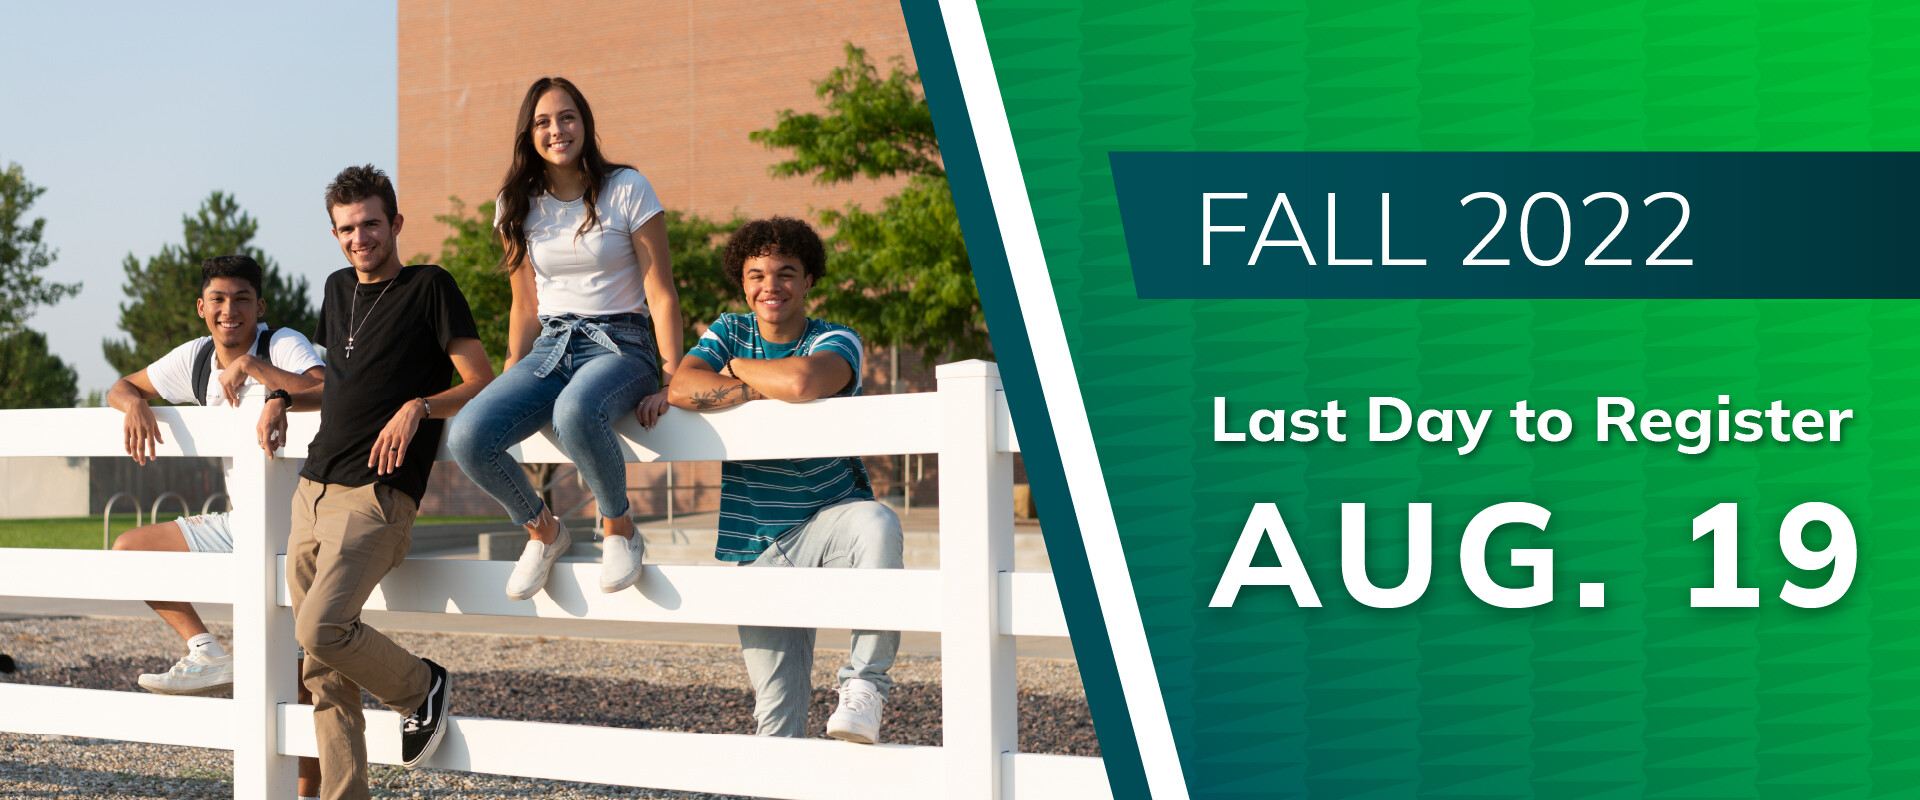 Fall 2022 Last Day to Register, Aug. 19